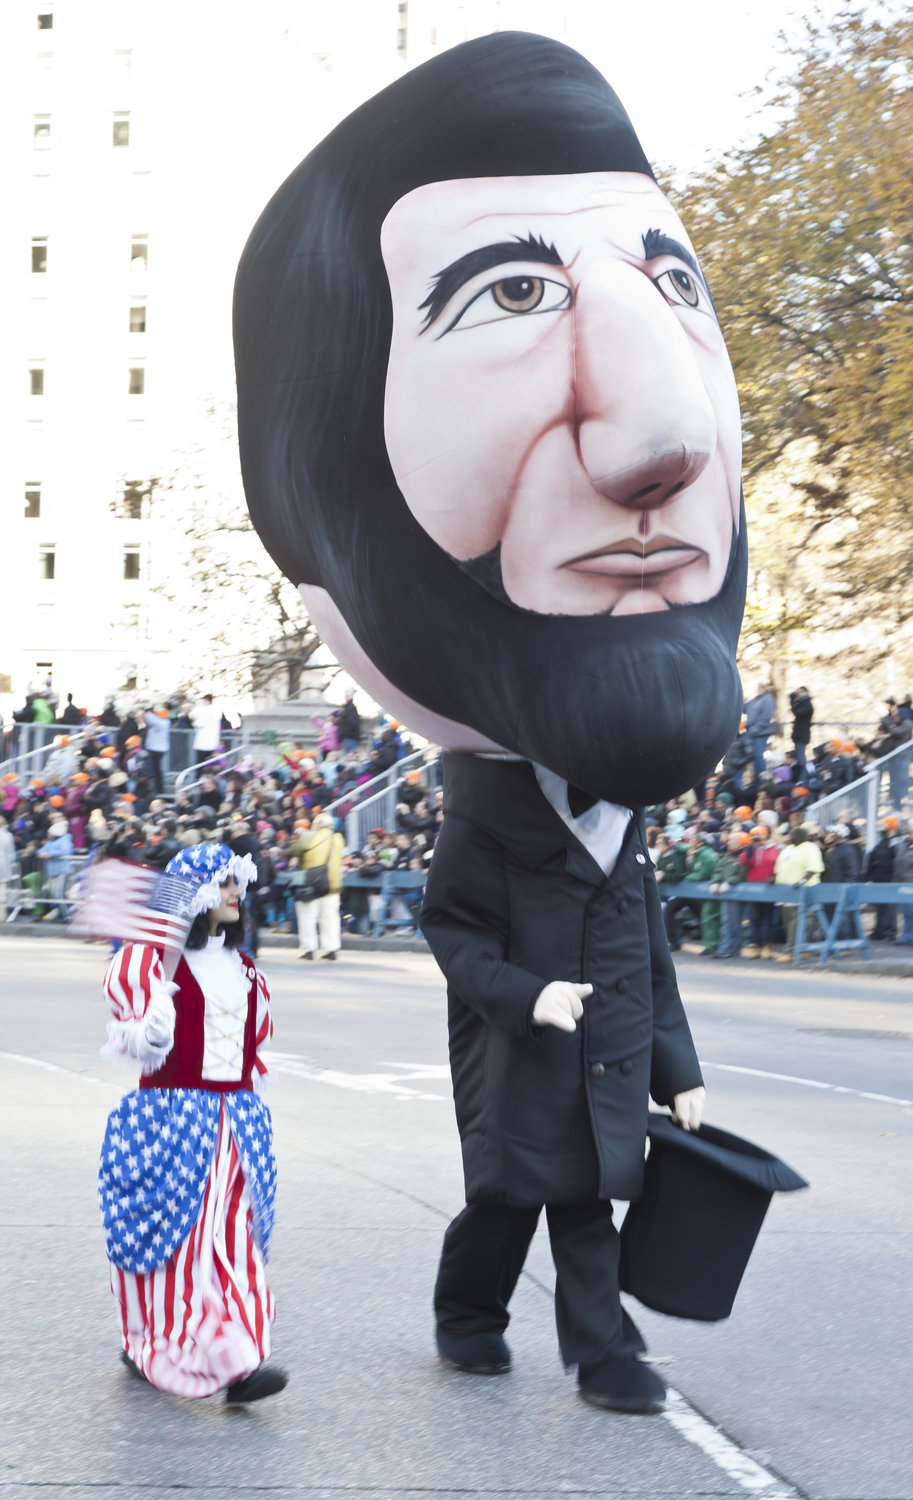 A balloon of Abraham Lincoln, who created the Thanksgiving Day holiday in 1863, was flown at the 86th Annual Macy’s Thanksgiving Day Parade on Nov. 22, 2012, in New York City.